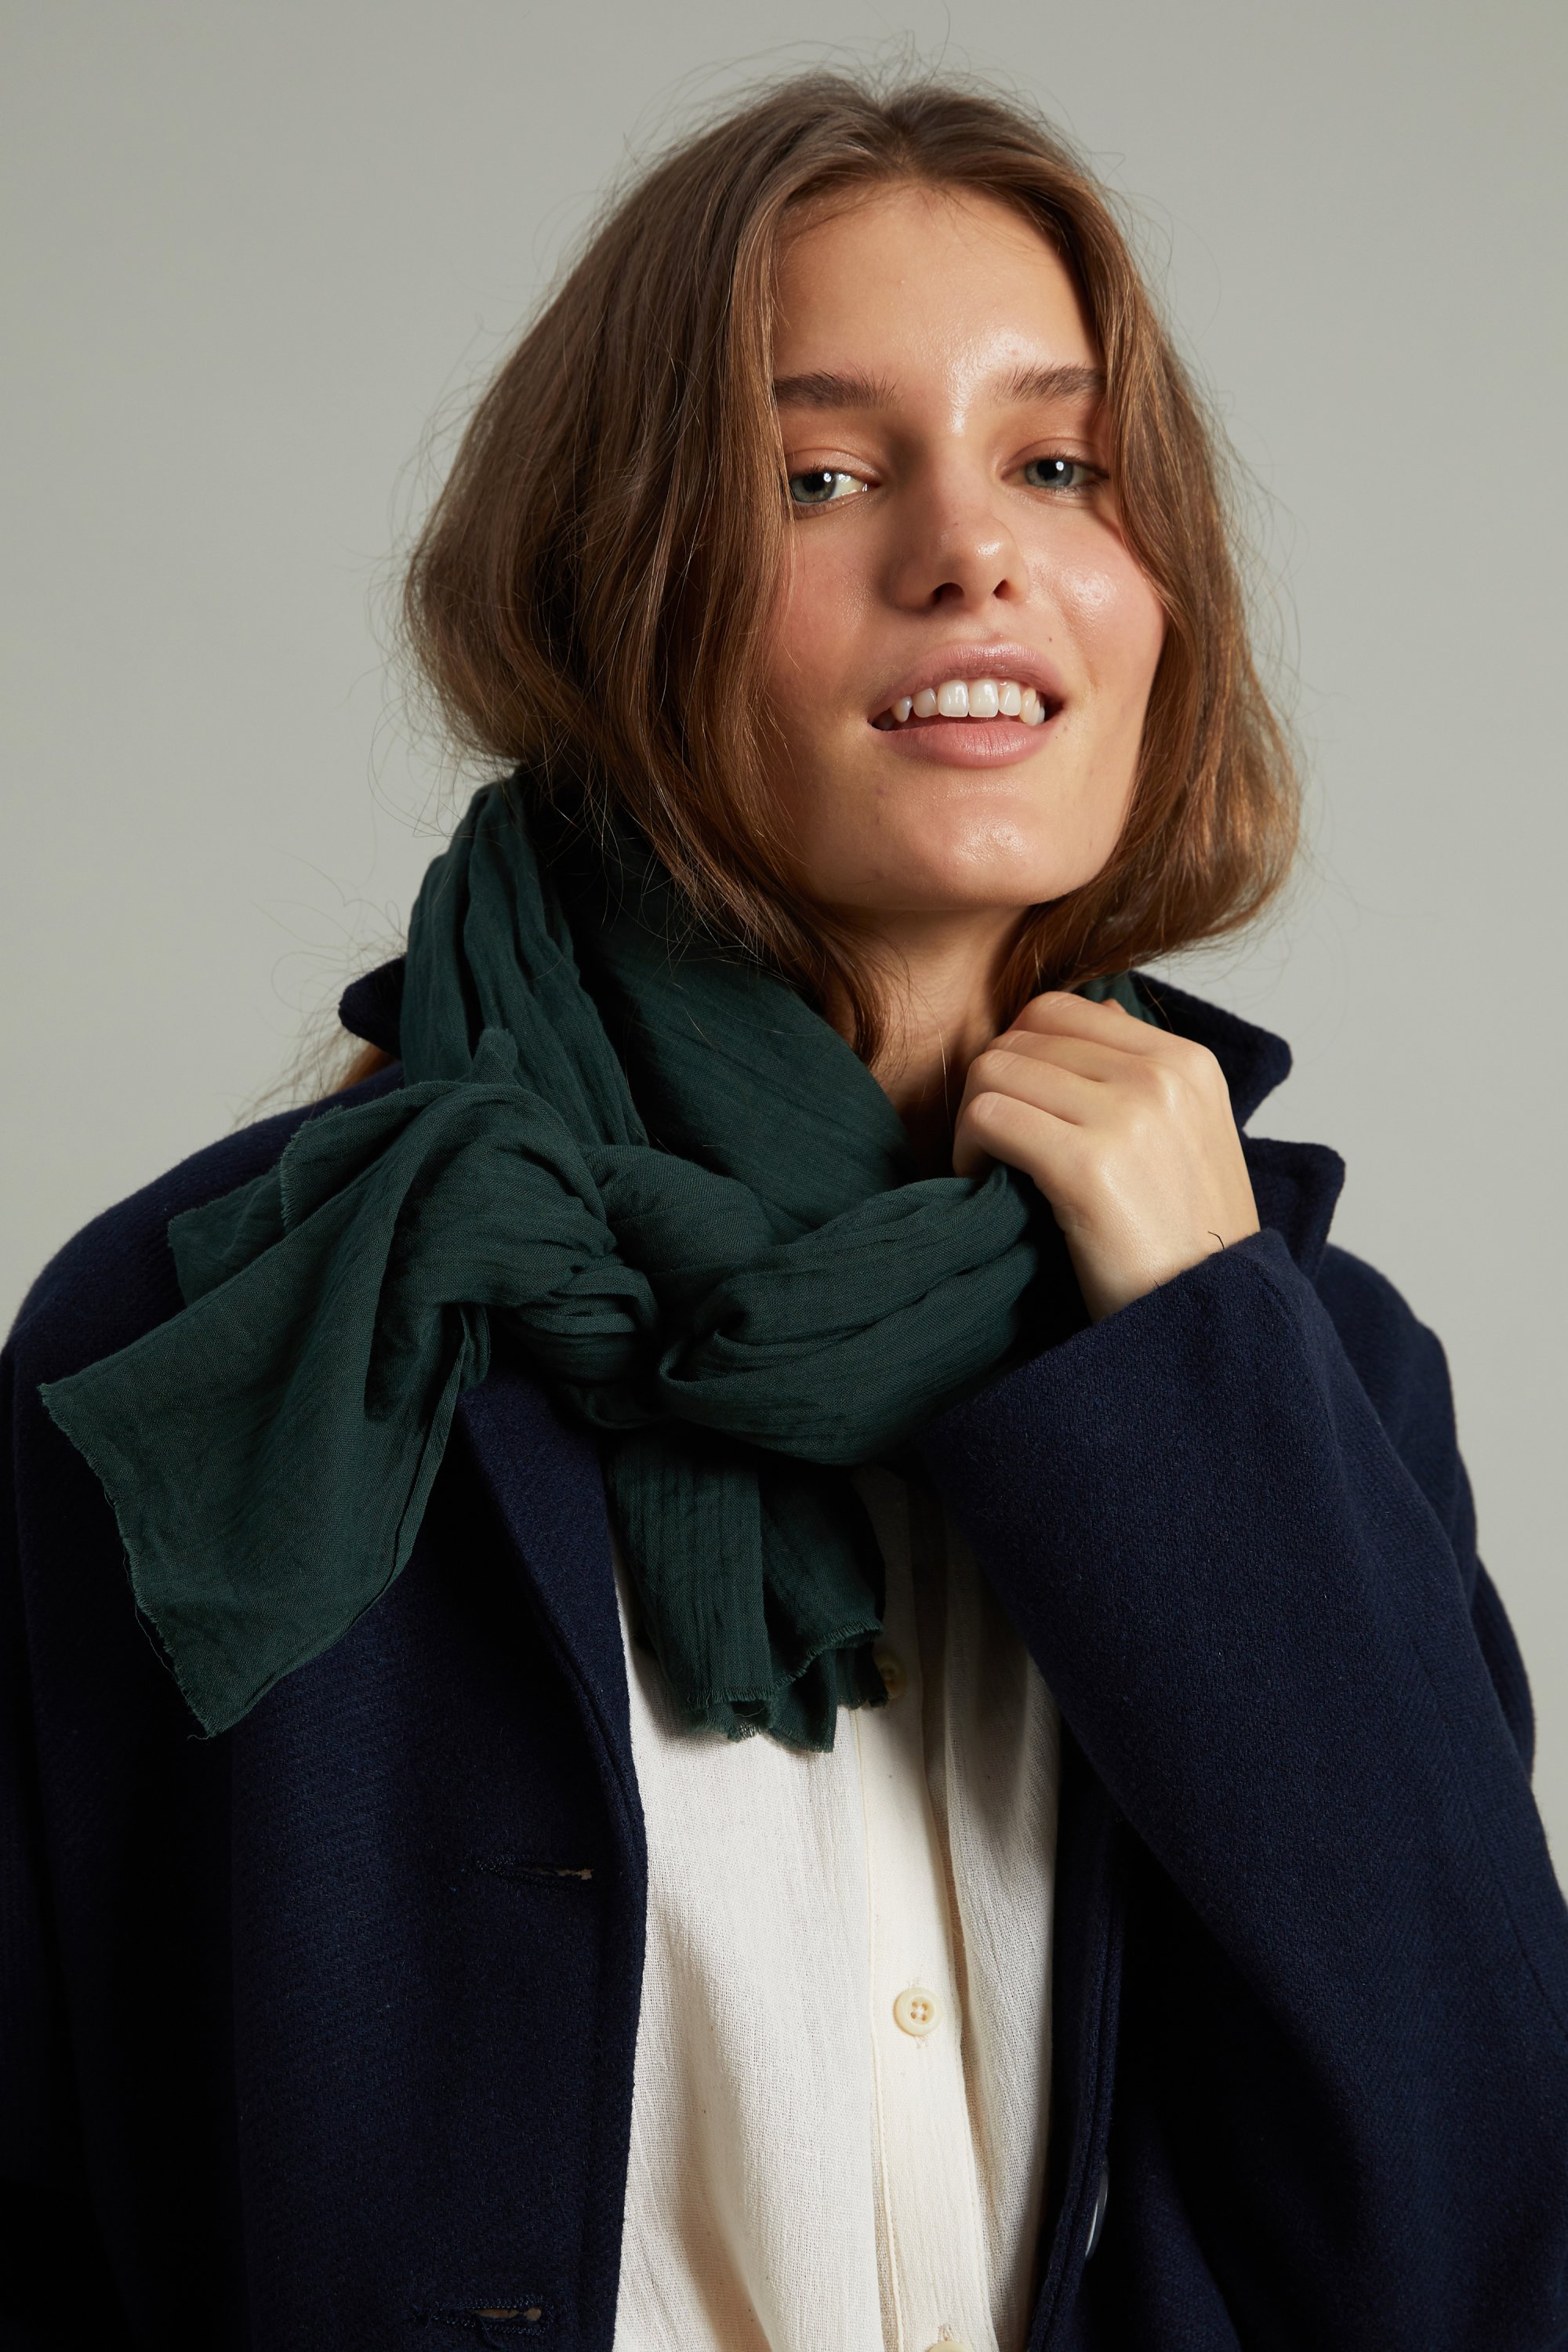 The first piece the brand created was 100% organic cotton scarves. (Photo courtesy of Harmonious)